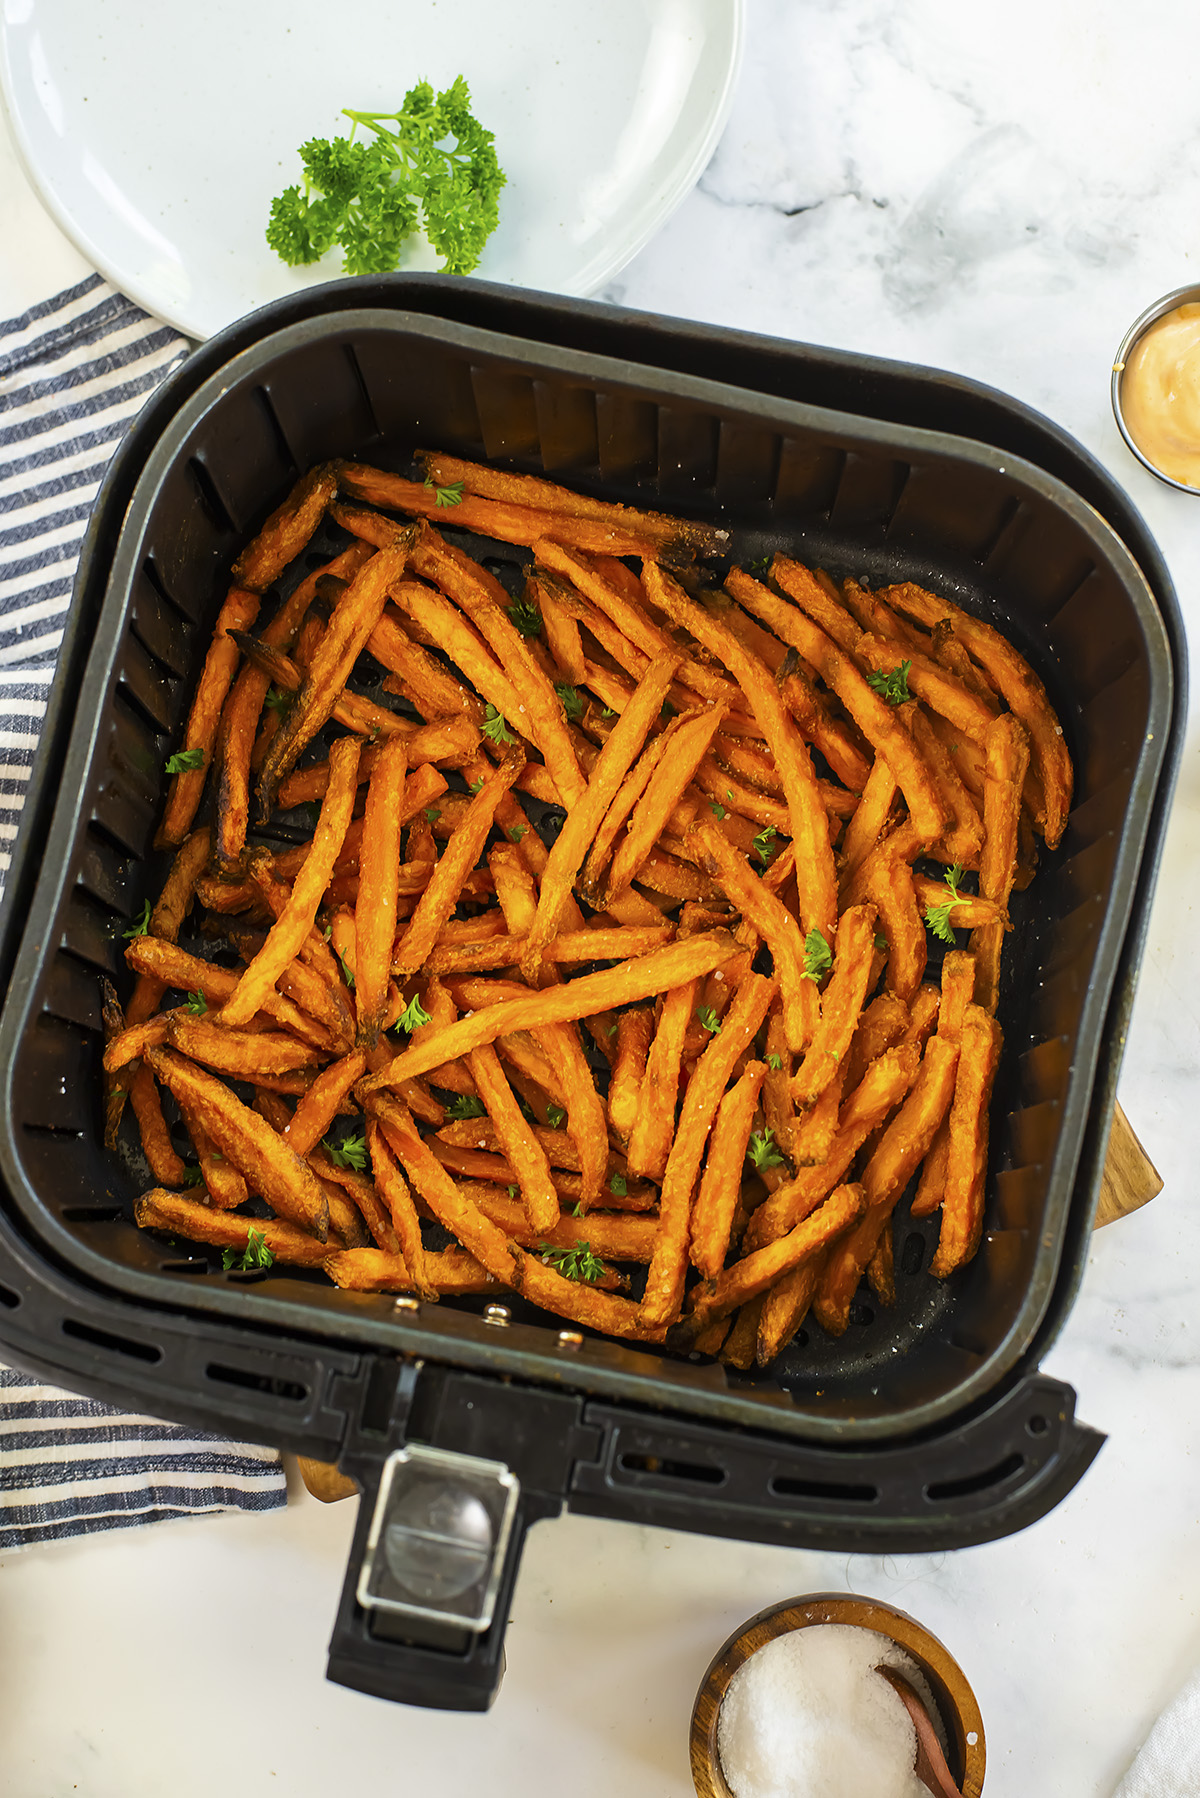 Overhead view of cooked sweet potato fries in an air fryer bsasket.